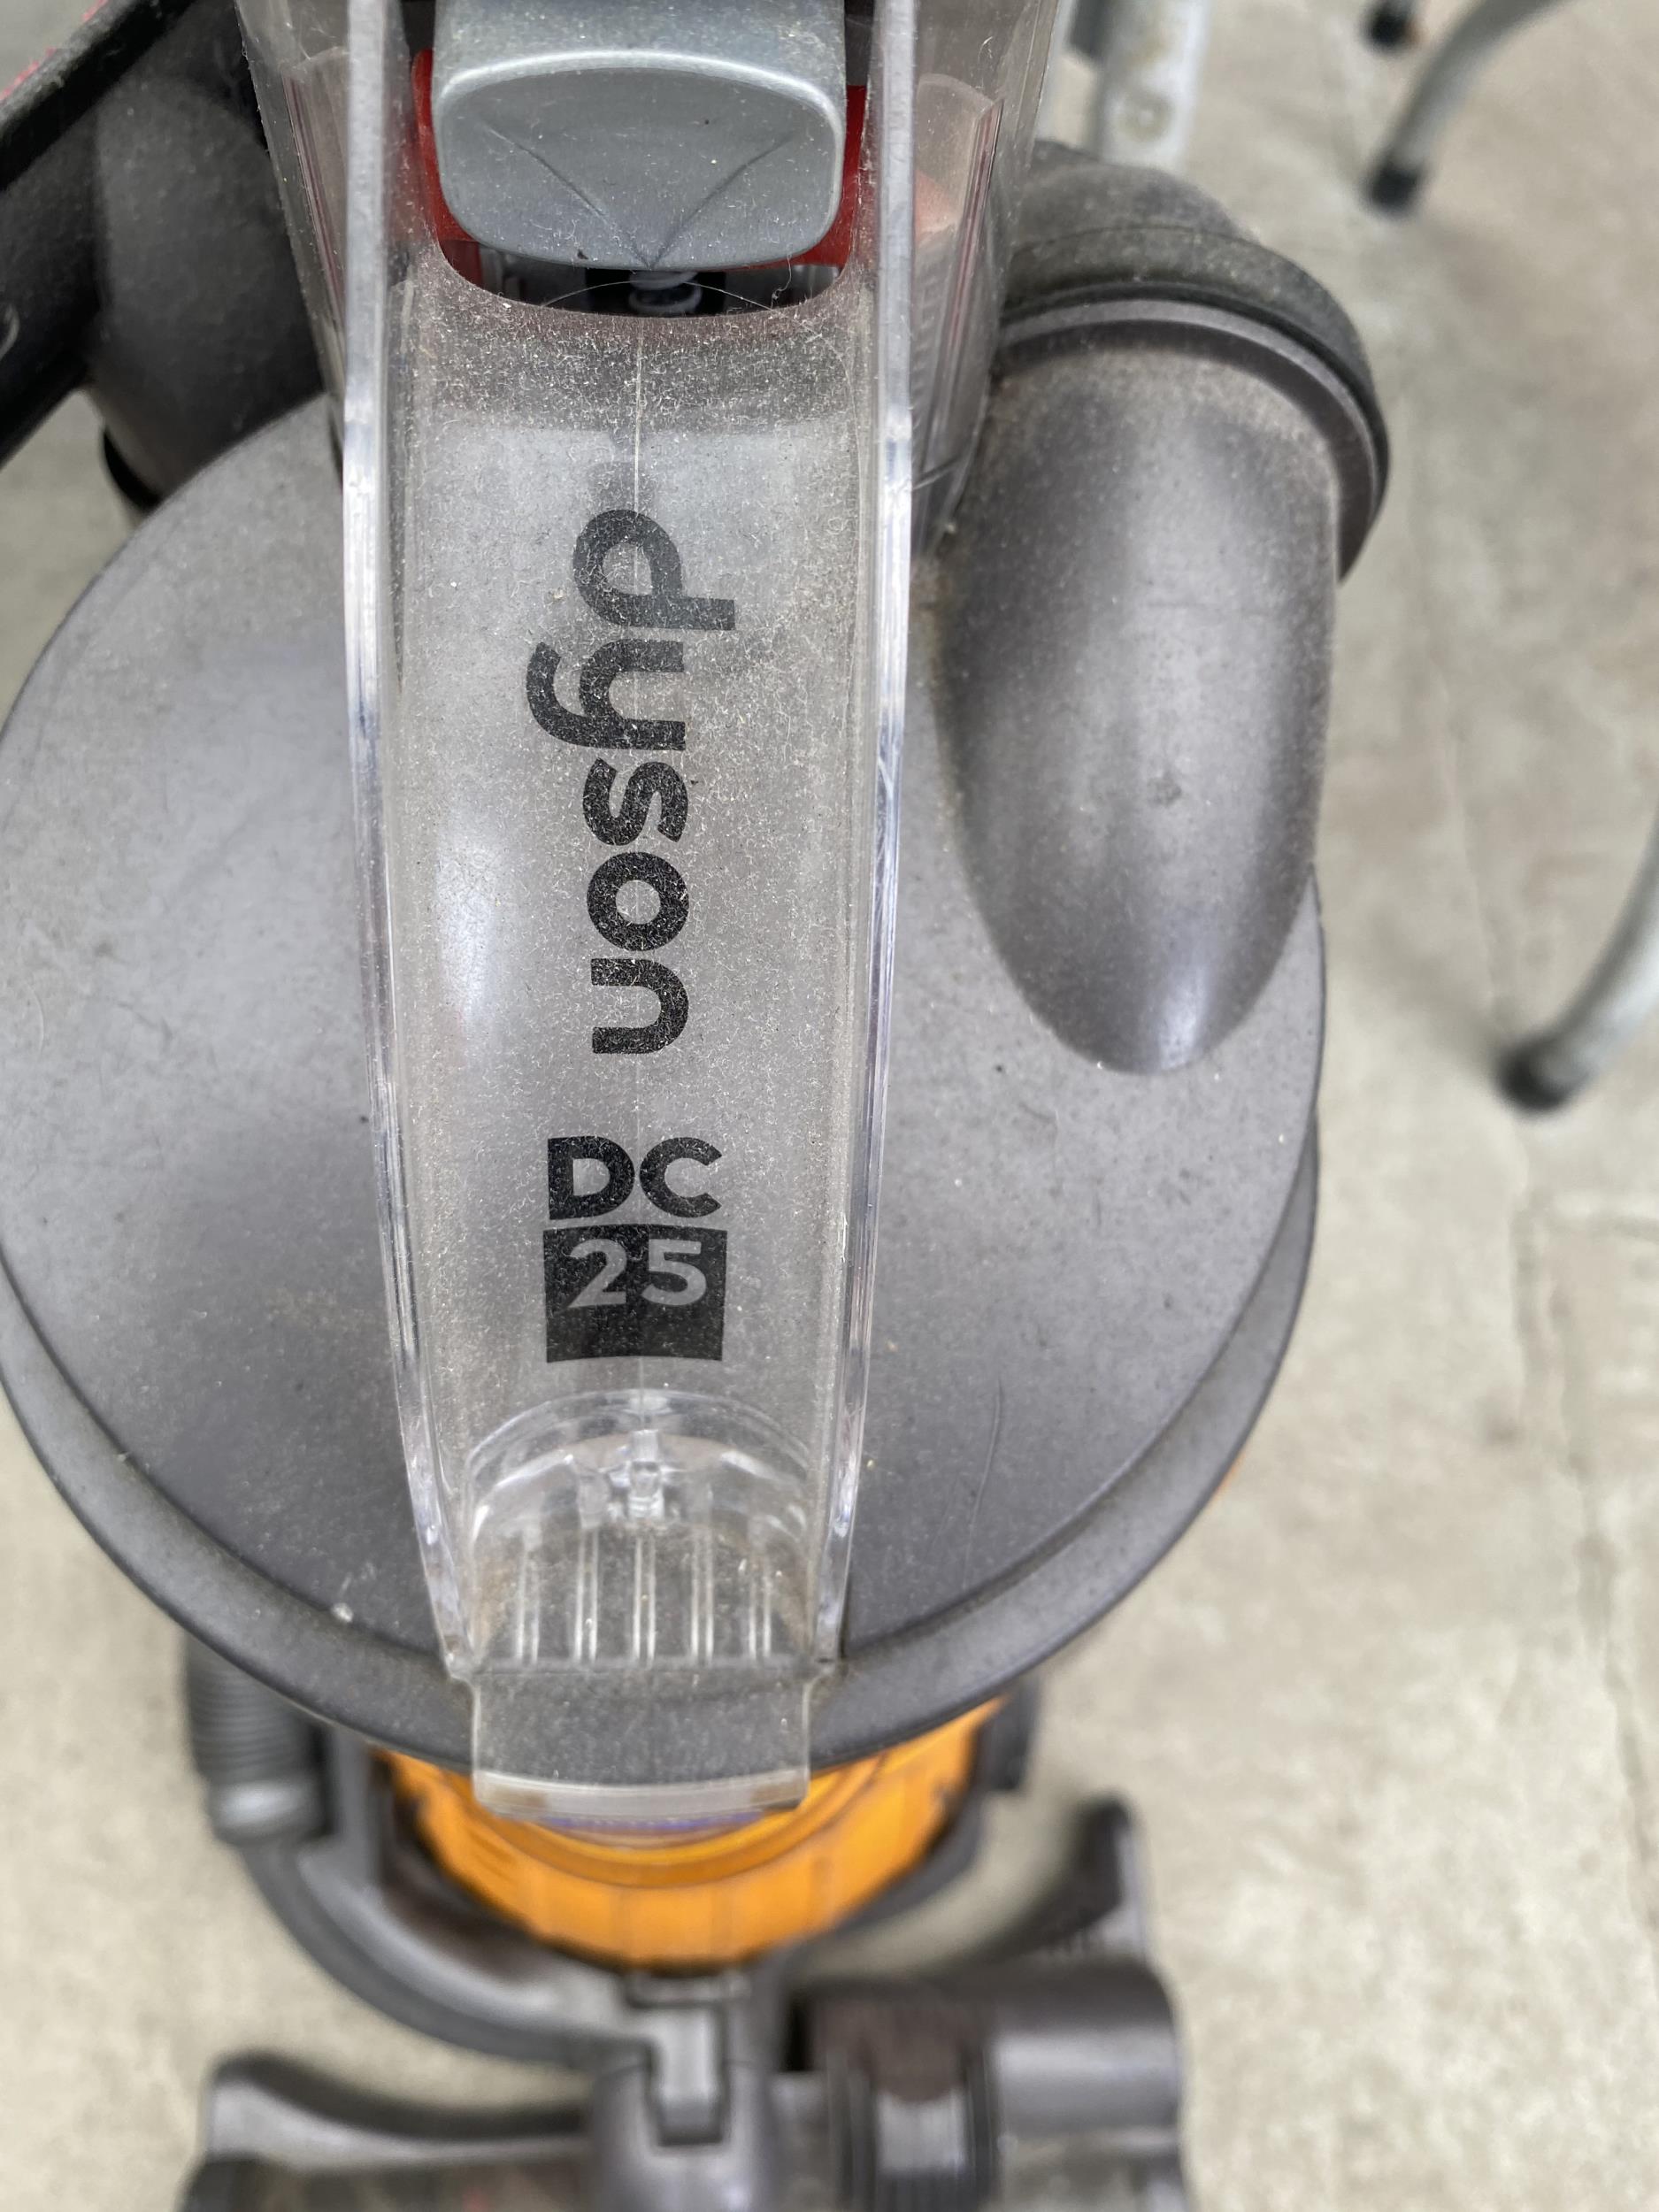 A DYSON DC25 VACUUM CLEANER - Image 2 of 2